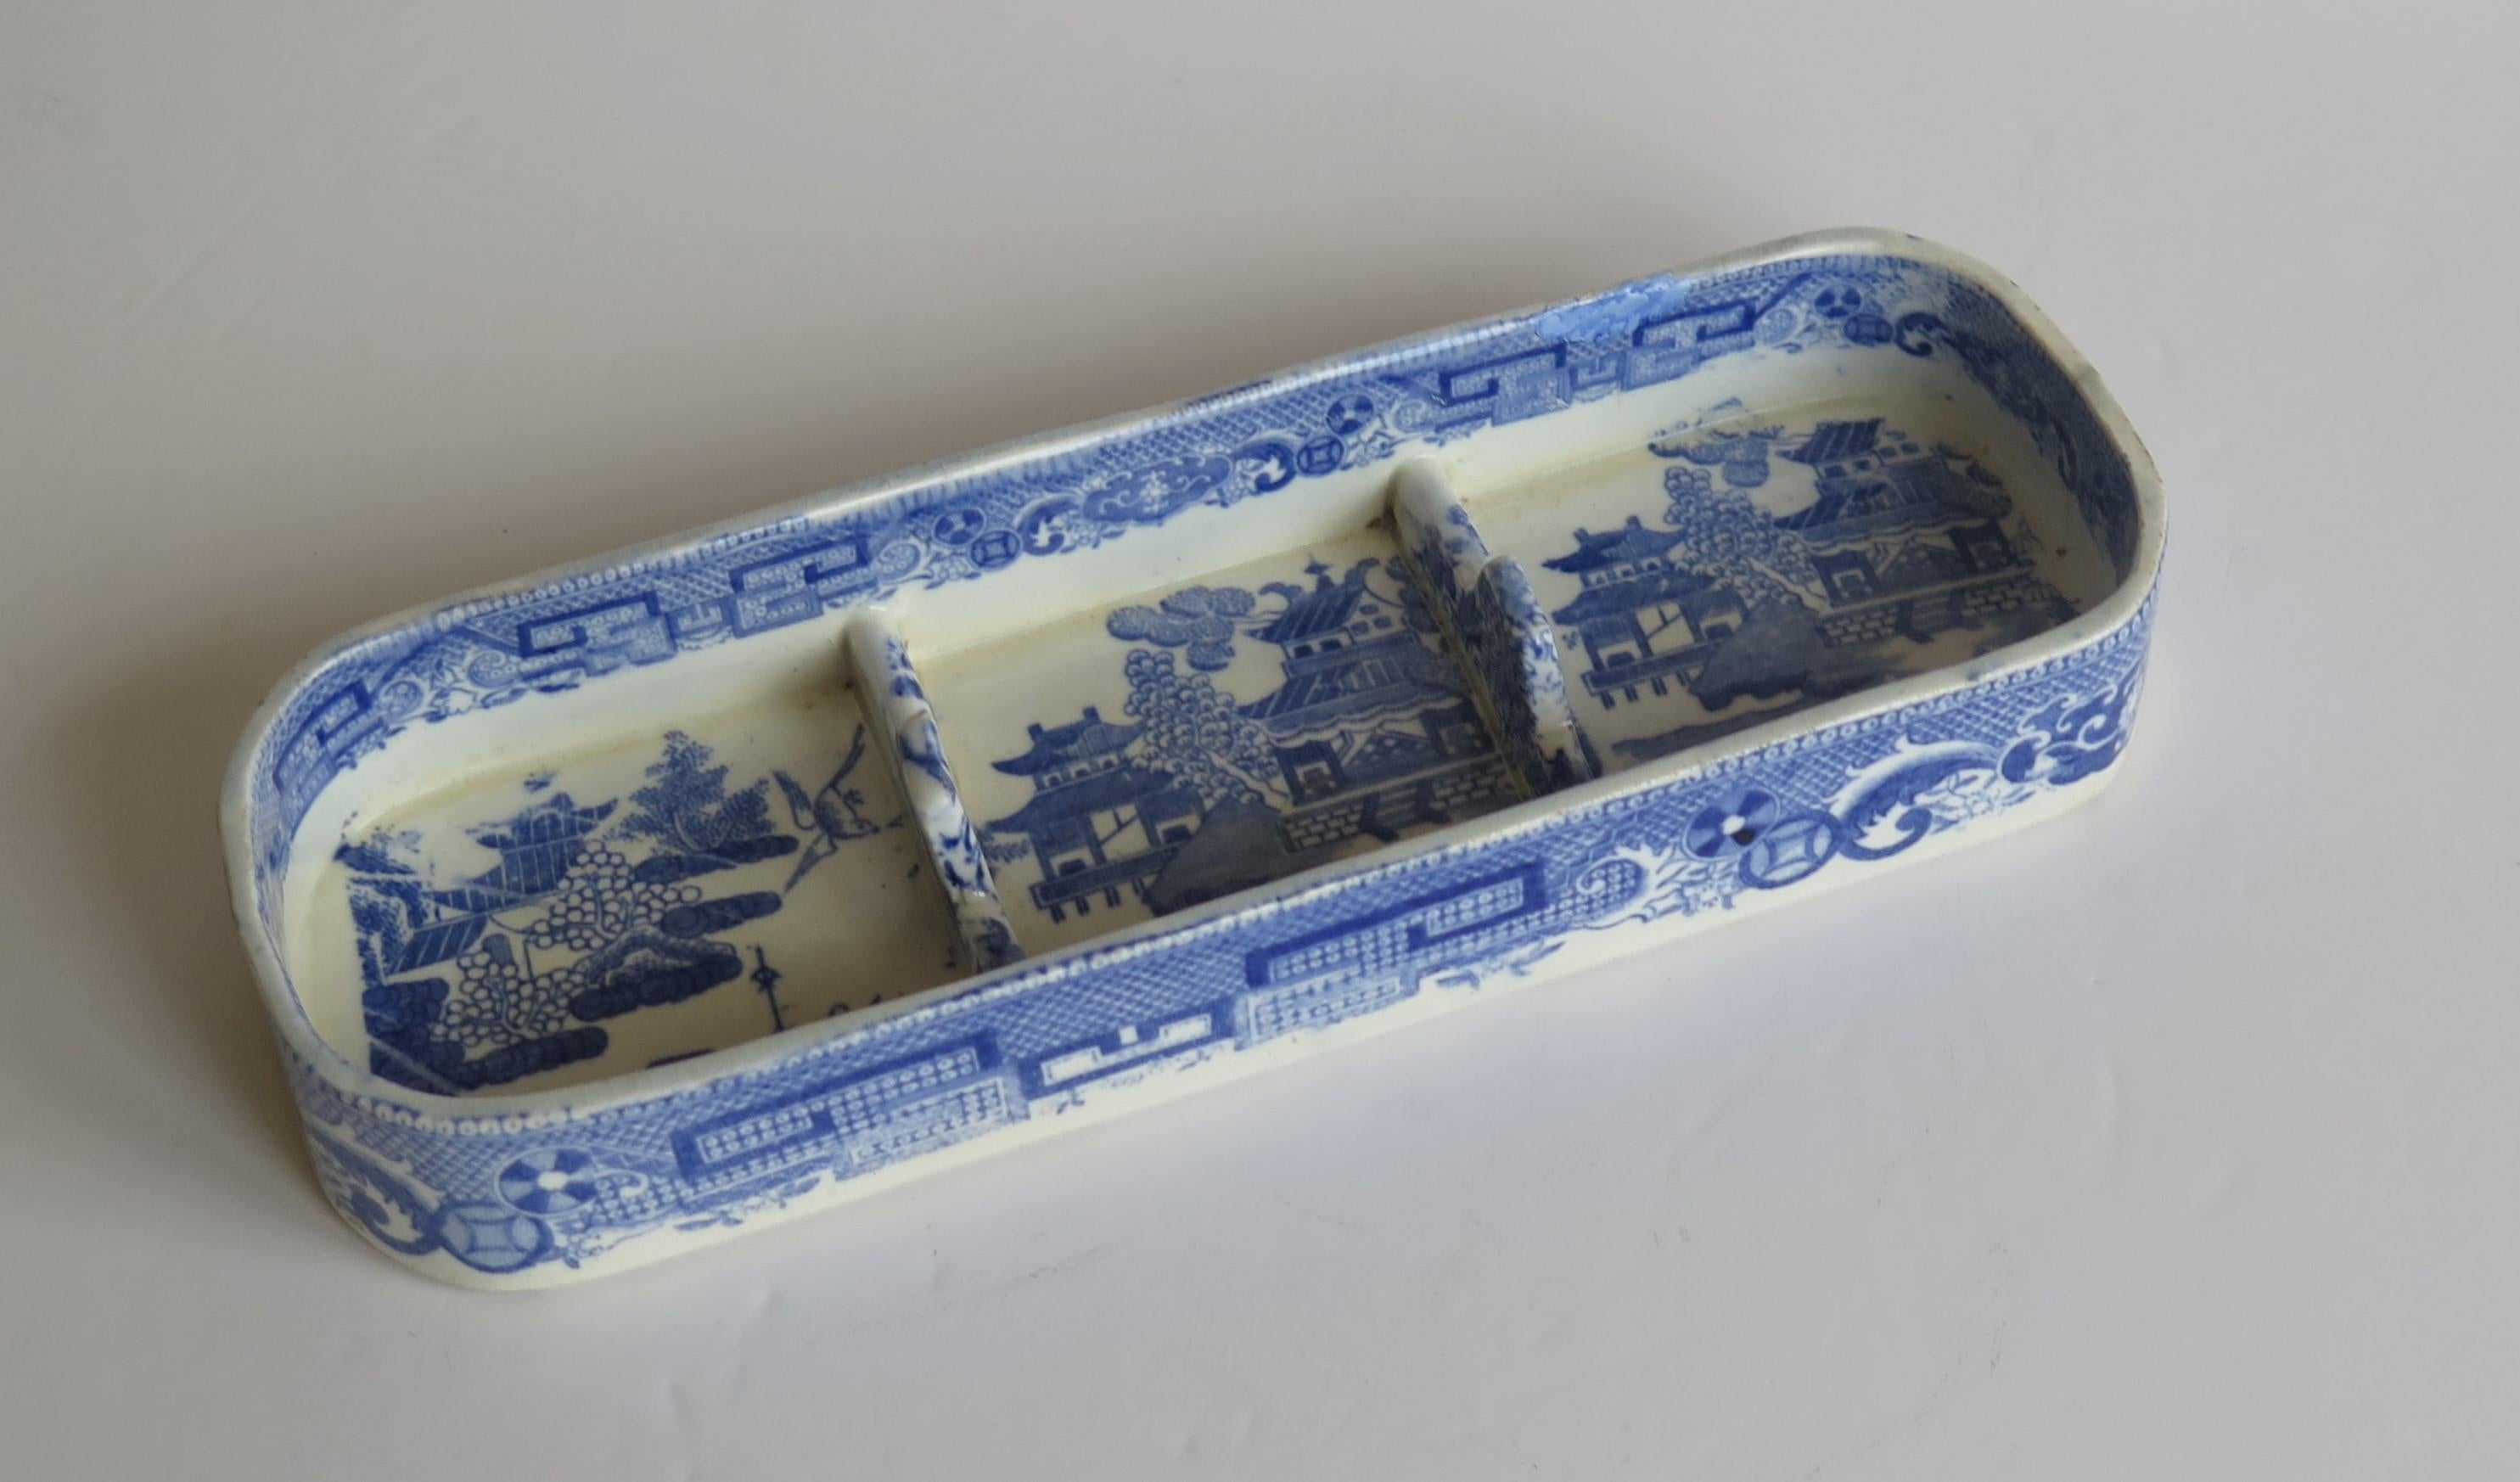 Rare Early Spode Pen Tray Pearlware Blue and White Willow Pattern, circa 1800 3